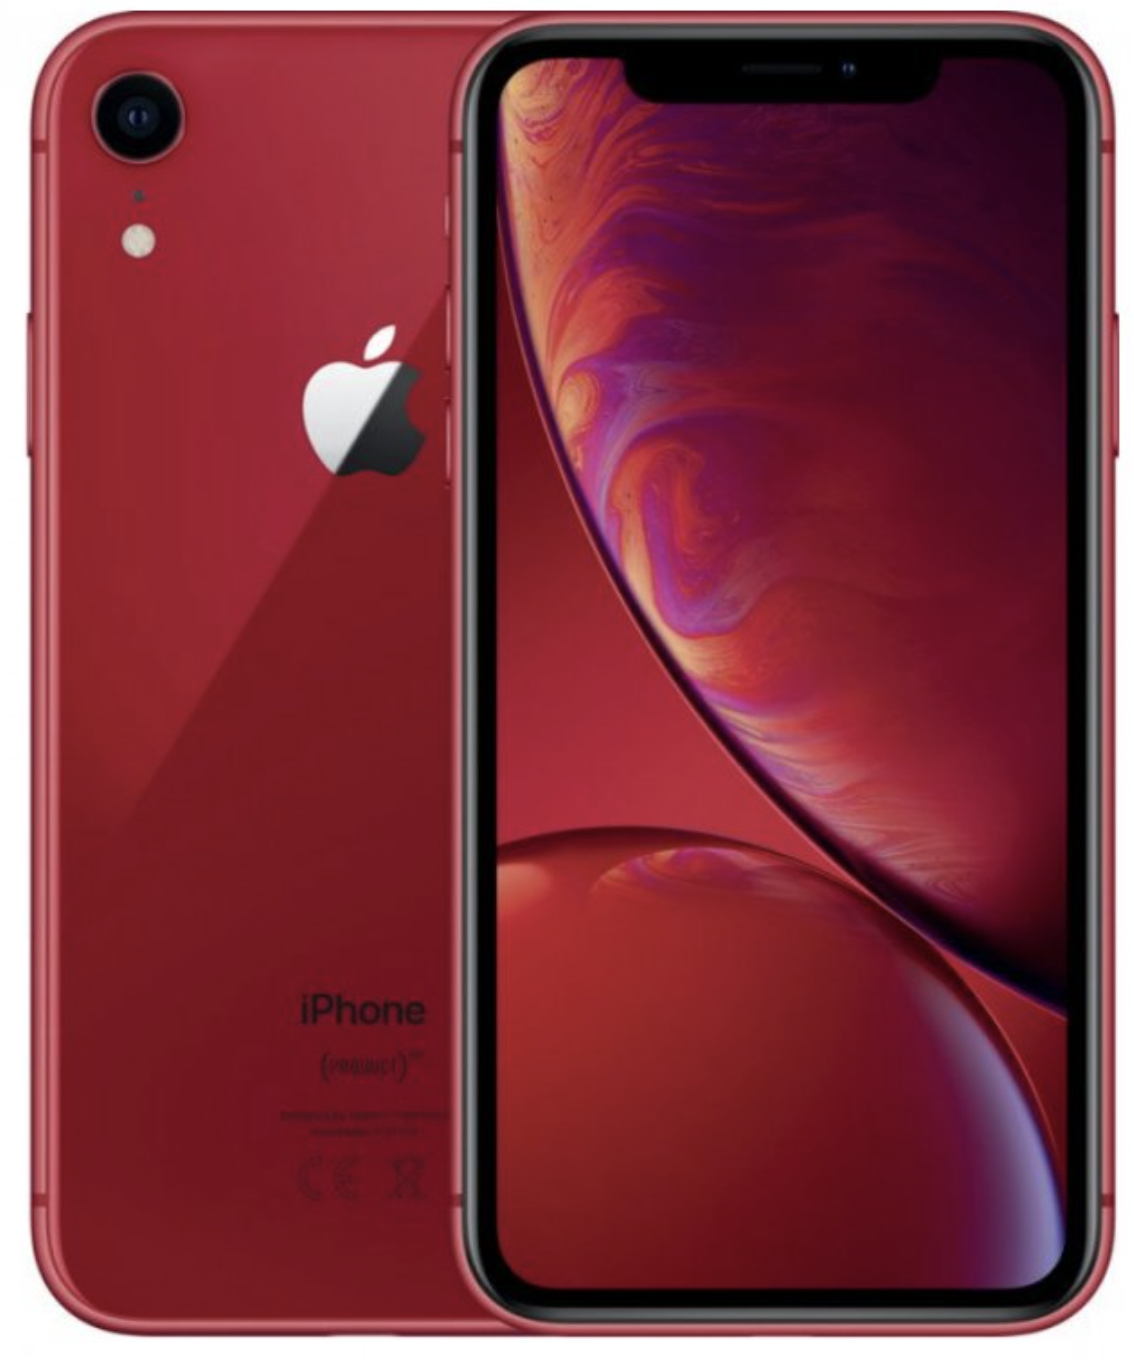 Apple iPhone XR 64 GB (PRODUCT) Red - B GRADE